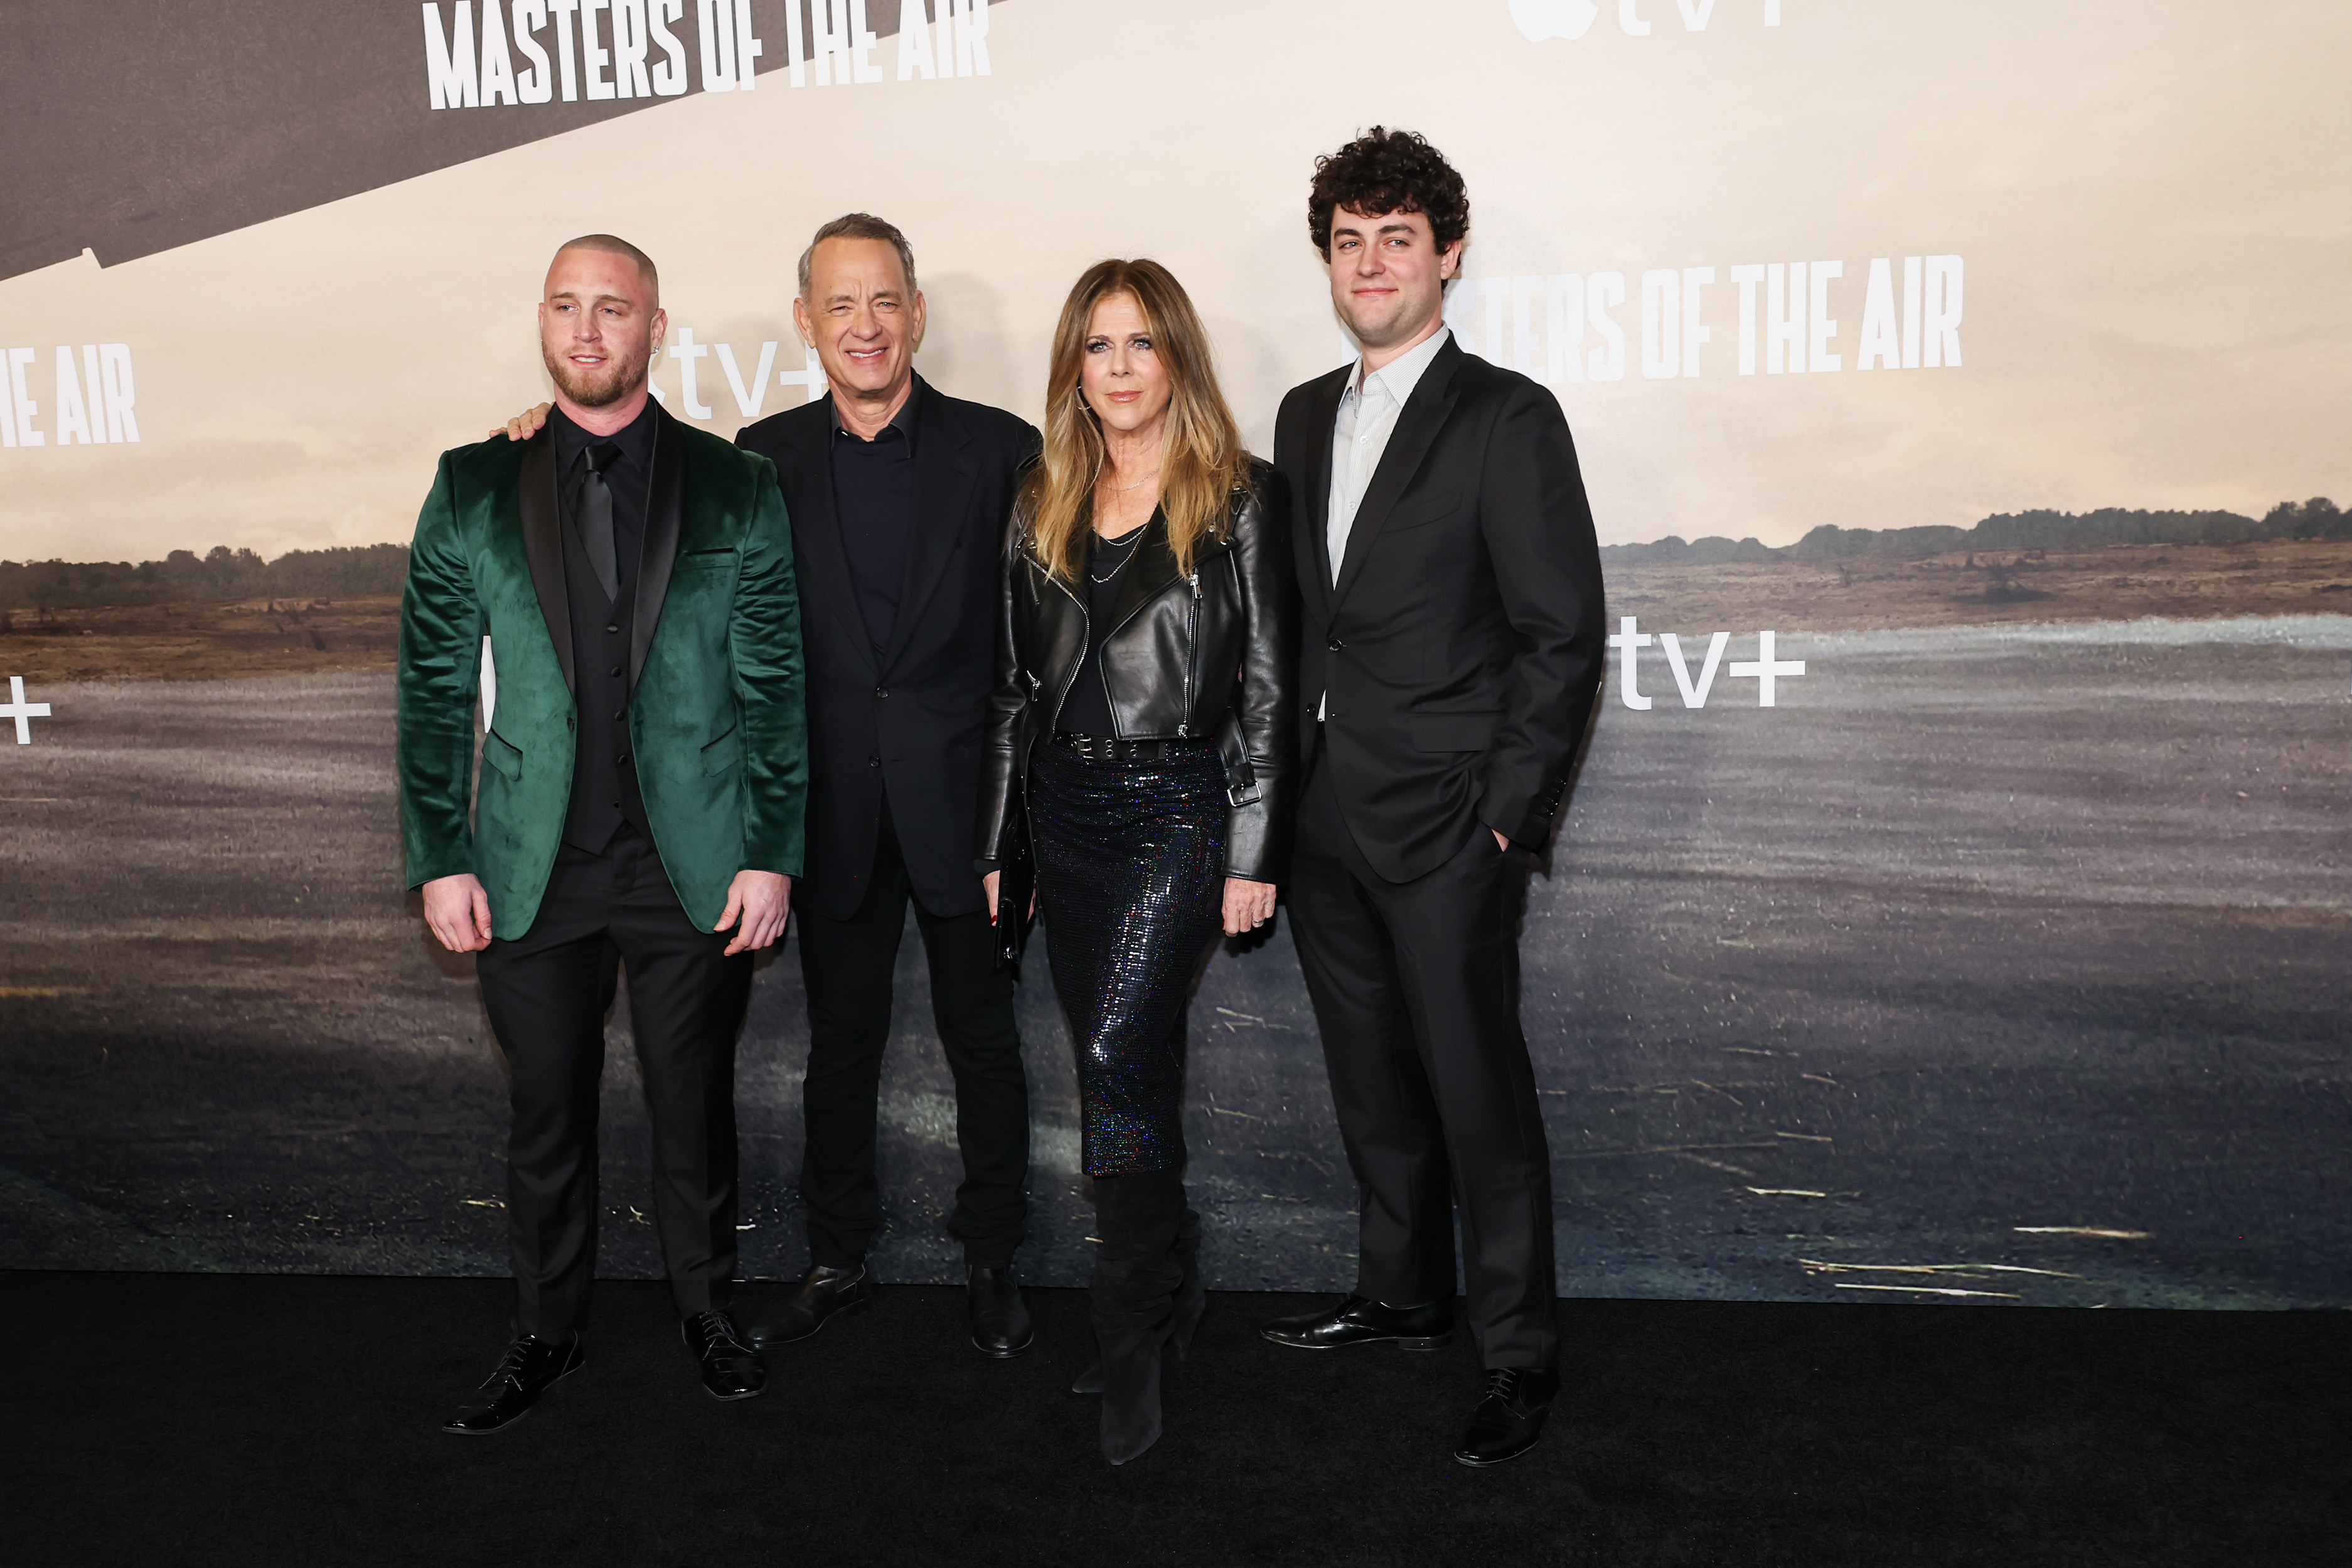 Chet Hanks, Tom Hanks, Rita Wilson, and Truman Hanks at the Los Angeles premiere of the "Masters of the Air" on January 10, 2024. | Source: Getty Images